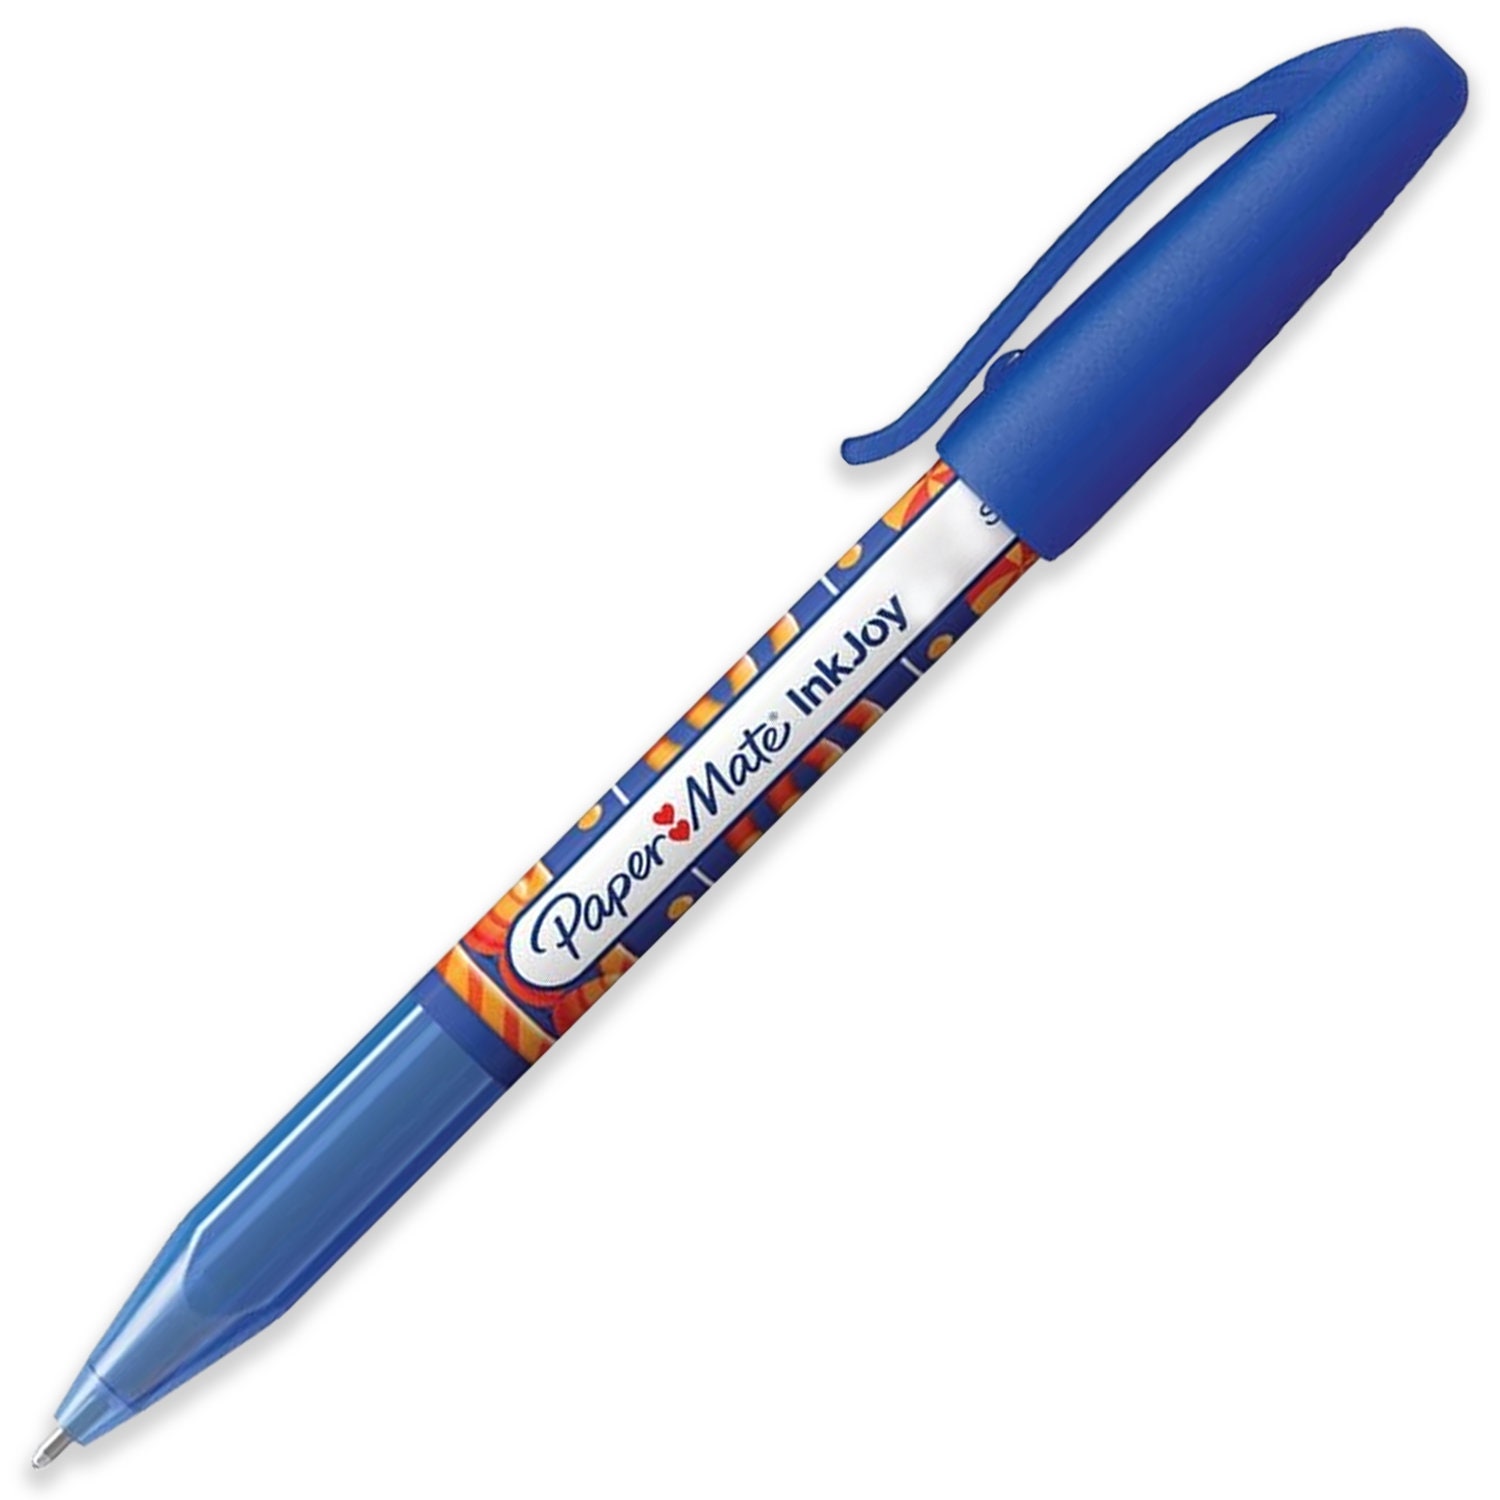 PAPER MATE 'INKJOY 100' CAPPED BALLPOINT PENS IN BLUE, GREEN, RED